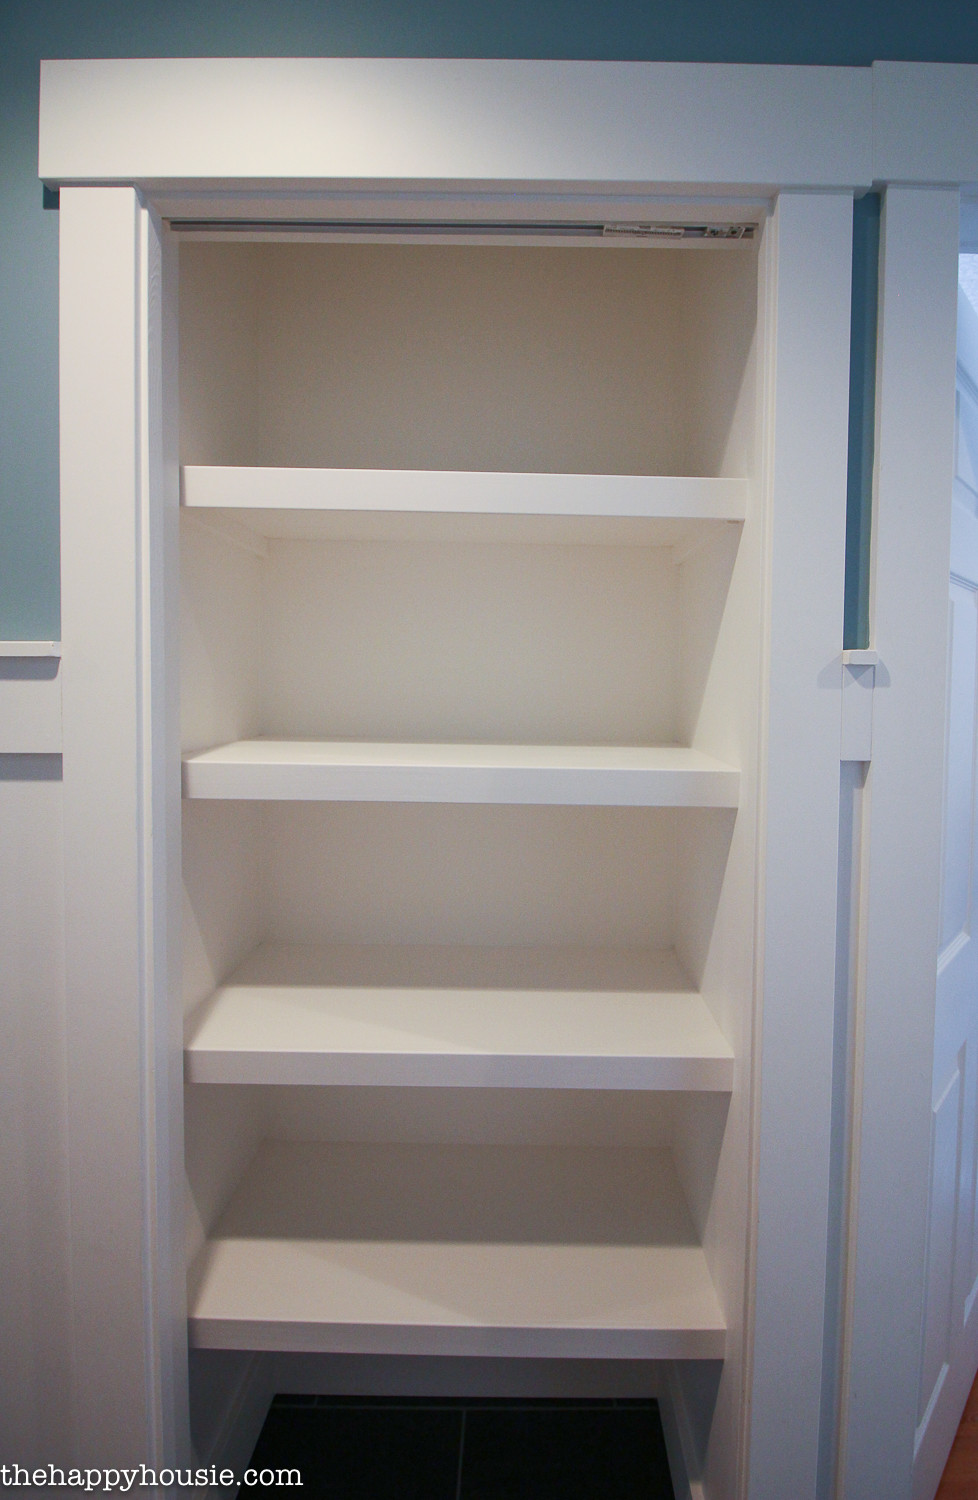 DIY Wood Closet
 How to Replace Wire Shelves with DIY Custom Wood Shelves